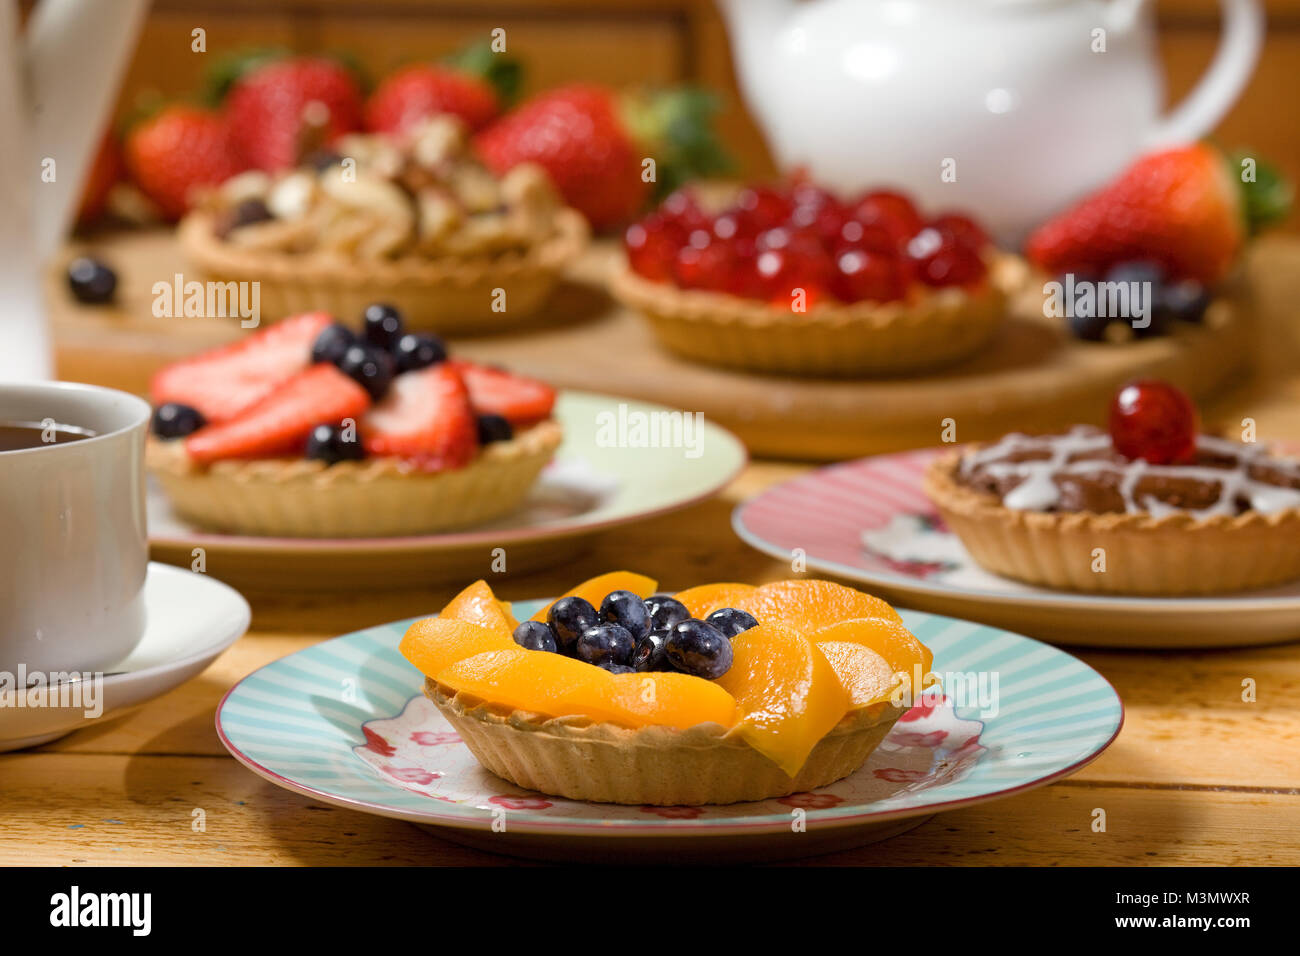 Peach and blueberry tart with a selection of tarts in the background Stock Photo